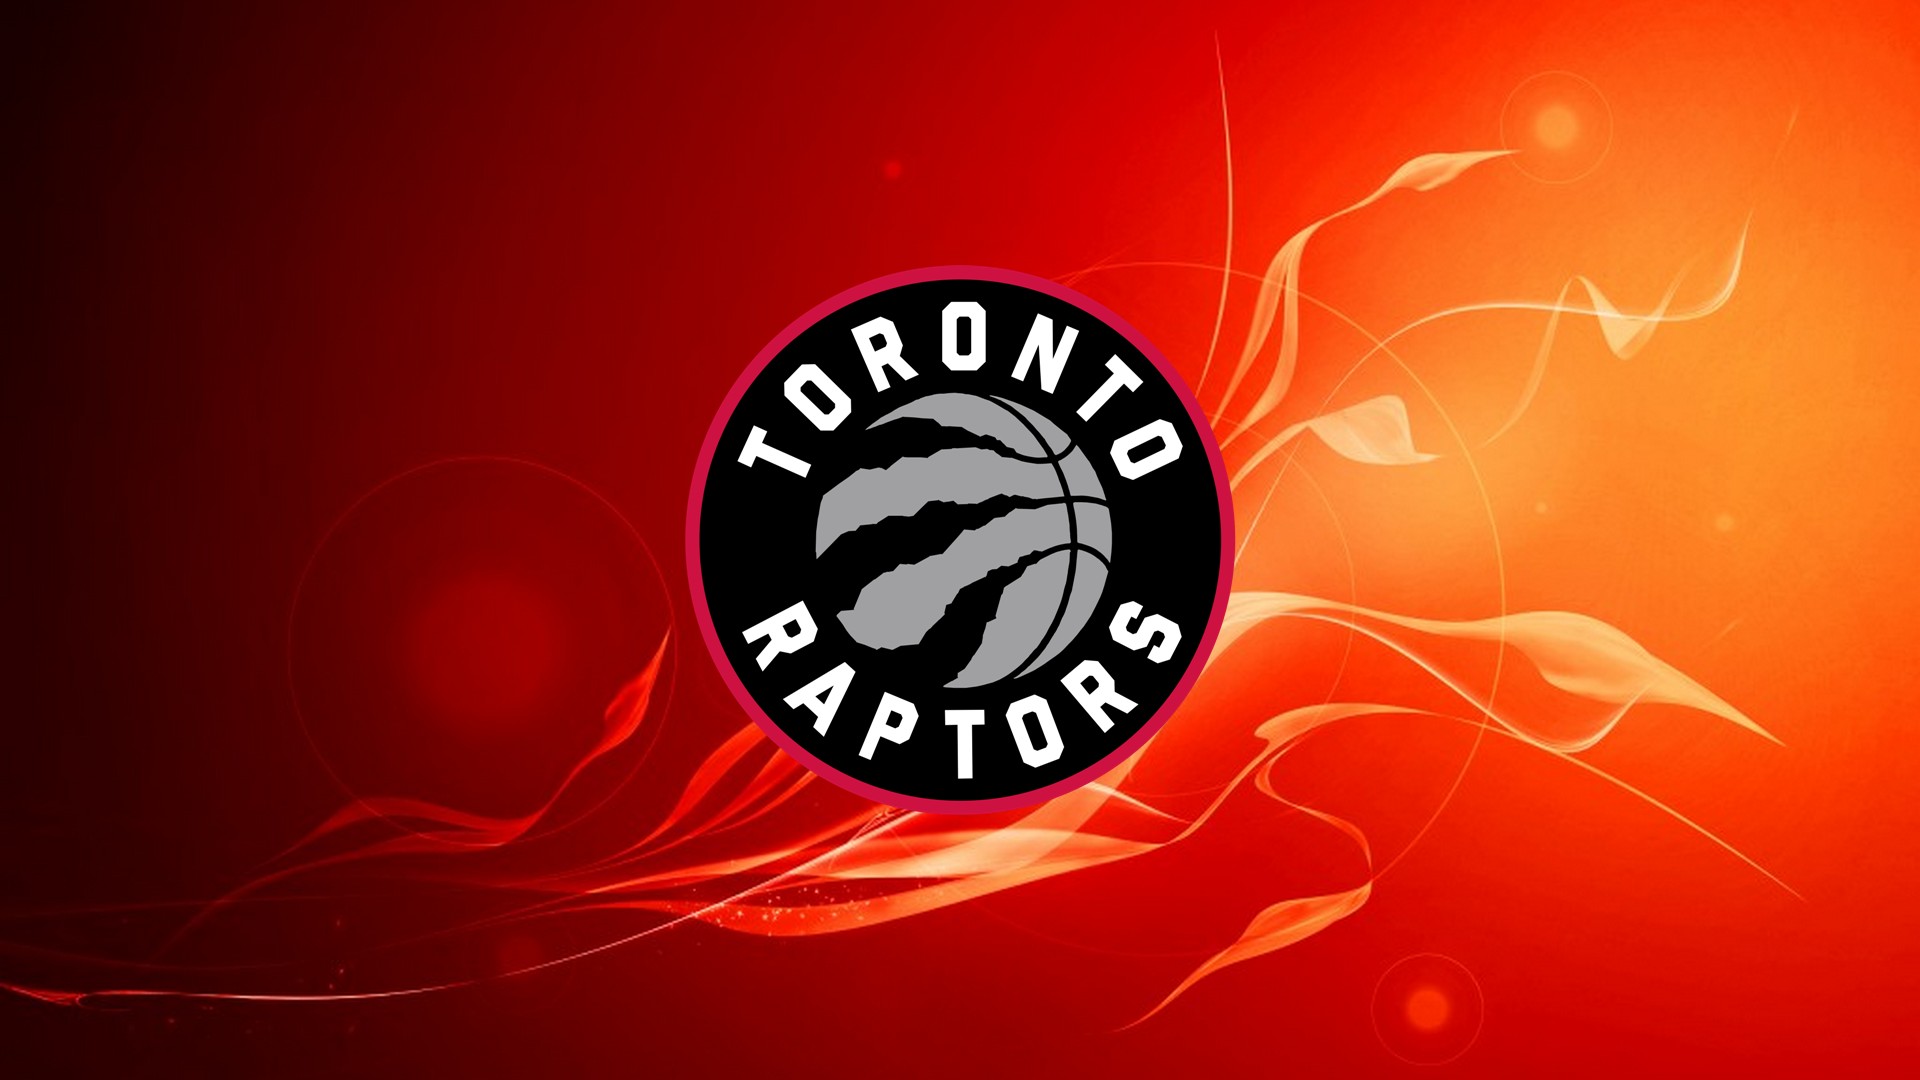 Wallpapers HD Toronto Raptors with image dimensions 1920x1080 pixel. You can make this wallpaper for your Desktop Computer Backgrounds, Windows or Mac Screensavers, iPhone Lock screen, Tablet or Android and another Mobile Phone device